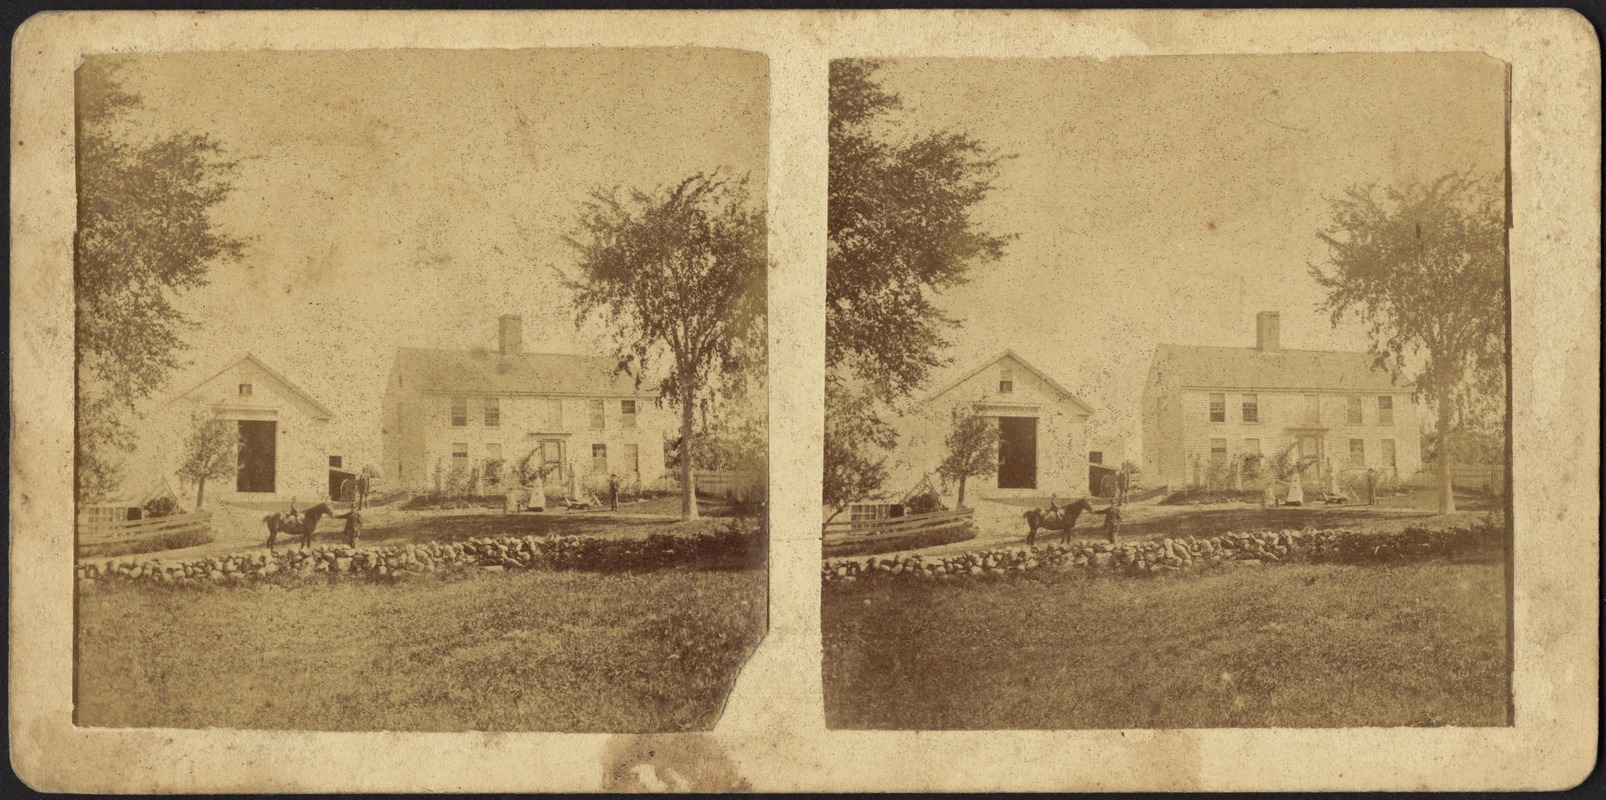 Unidentified family pictured with farmhouse, barn, and pasture